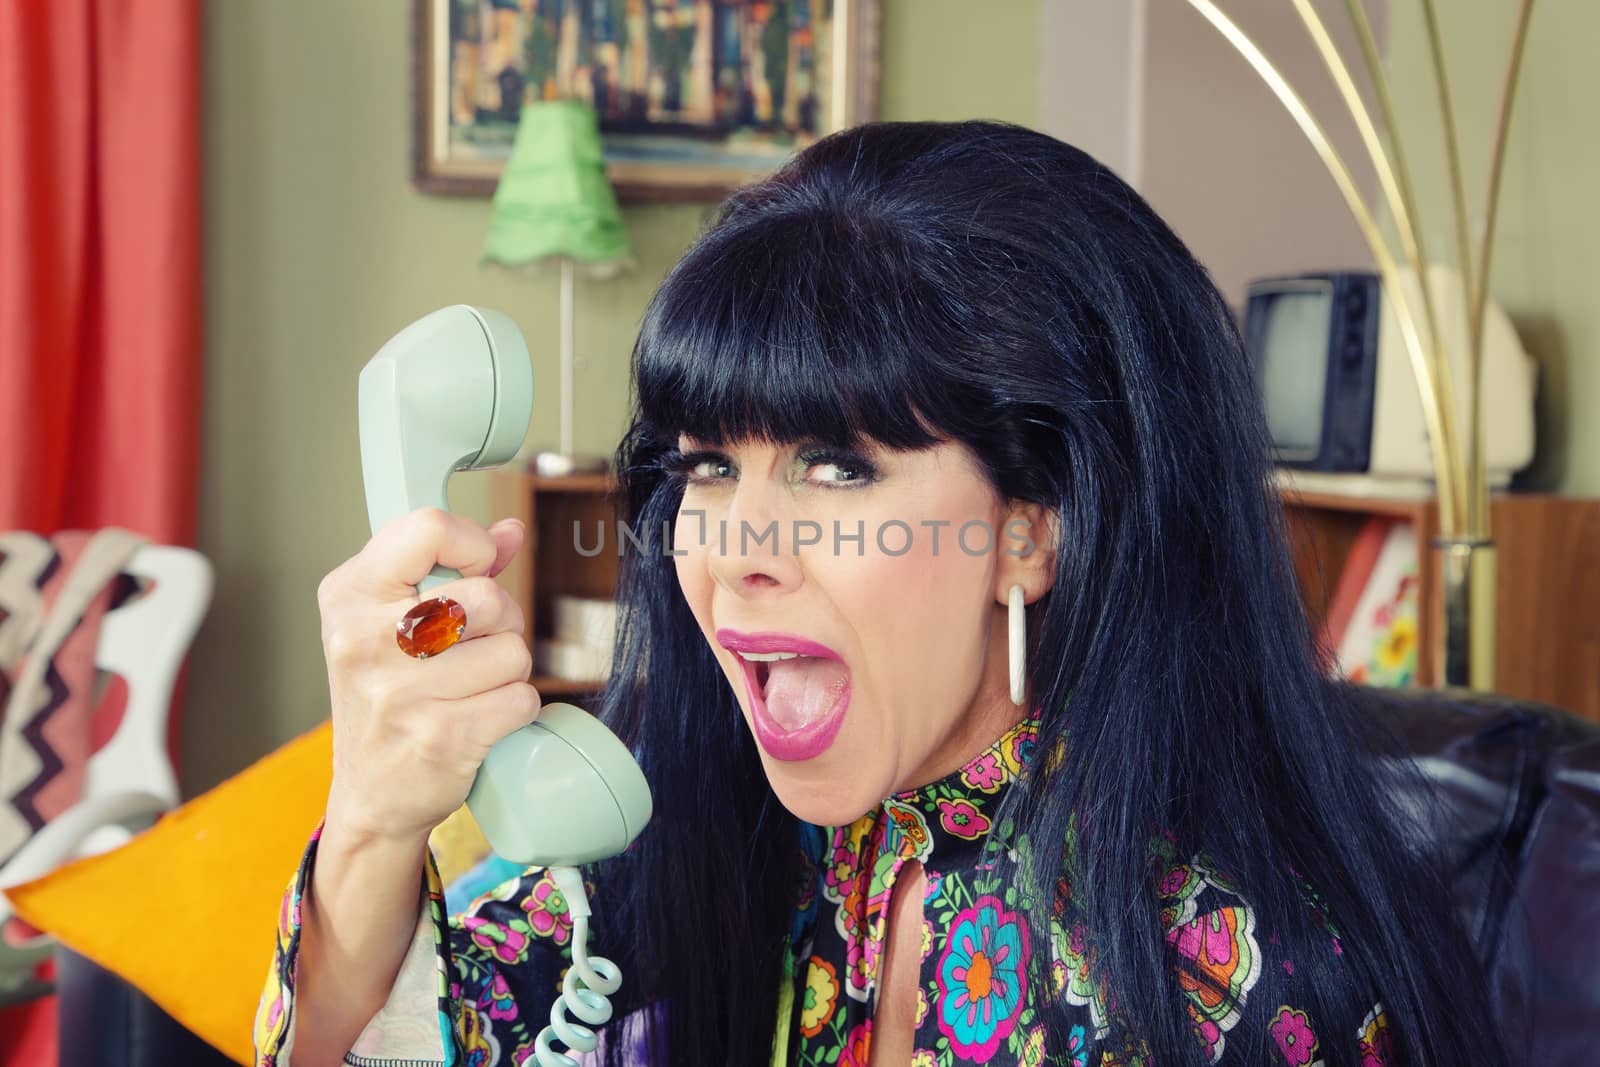 Woman yelling into phone with bad connection